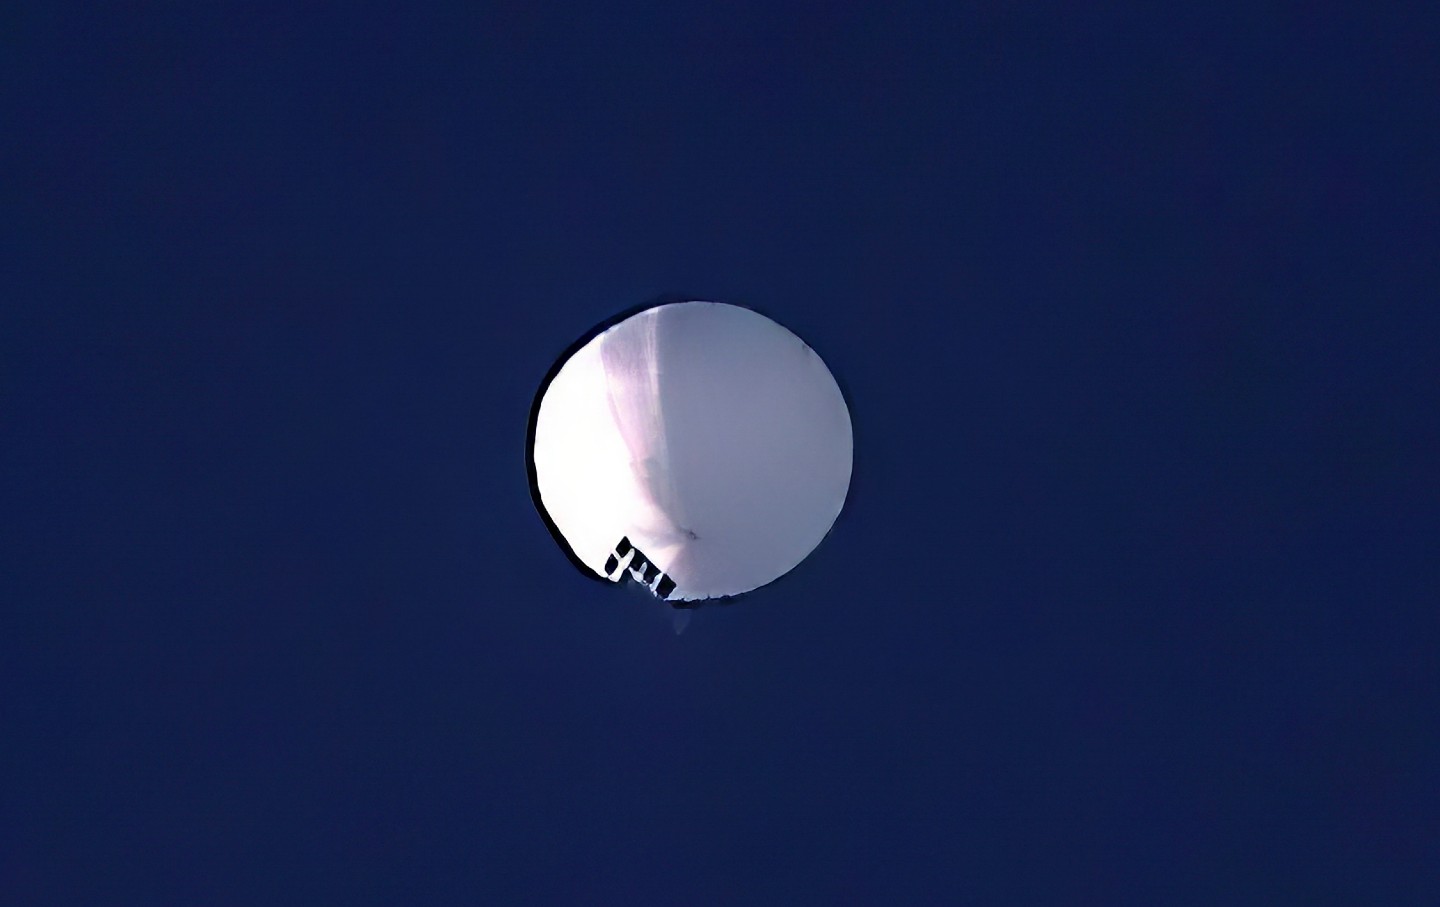 Threat inflation: the Chinese balloon floats over Billings, Mont., on Wednesday, February 1.